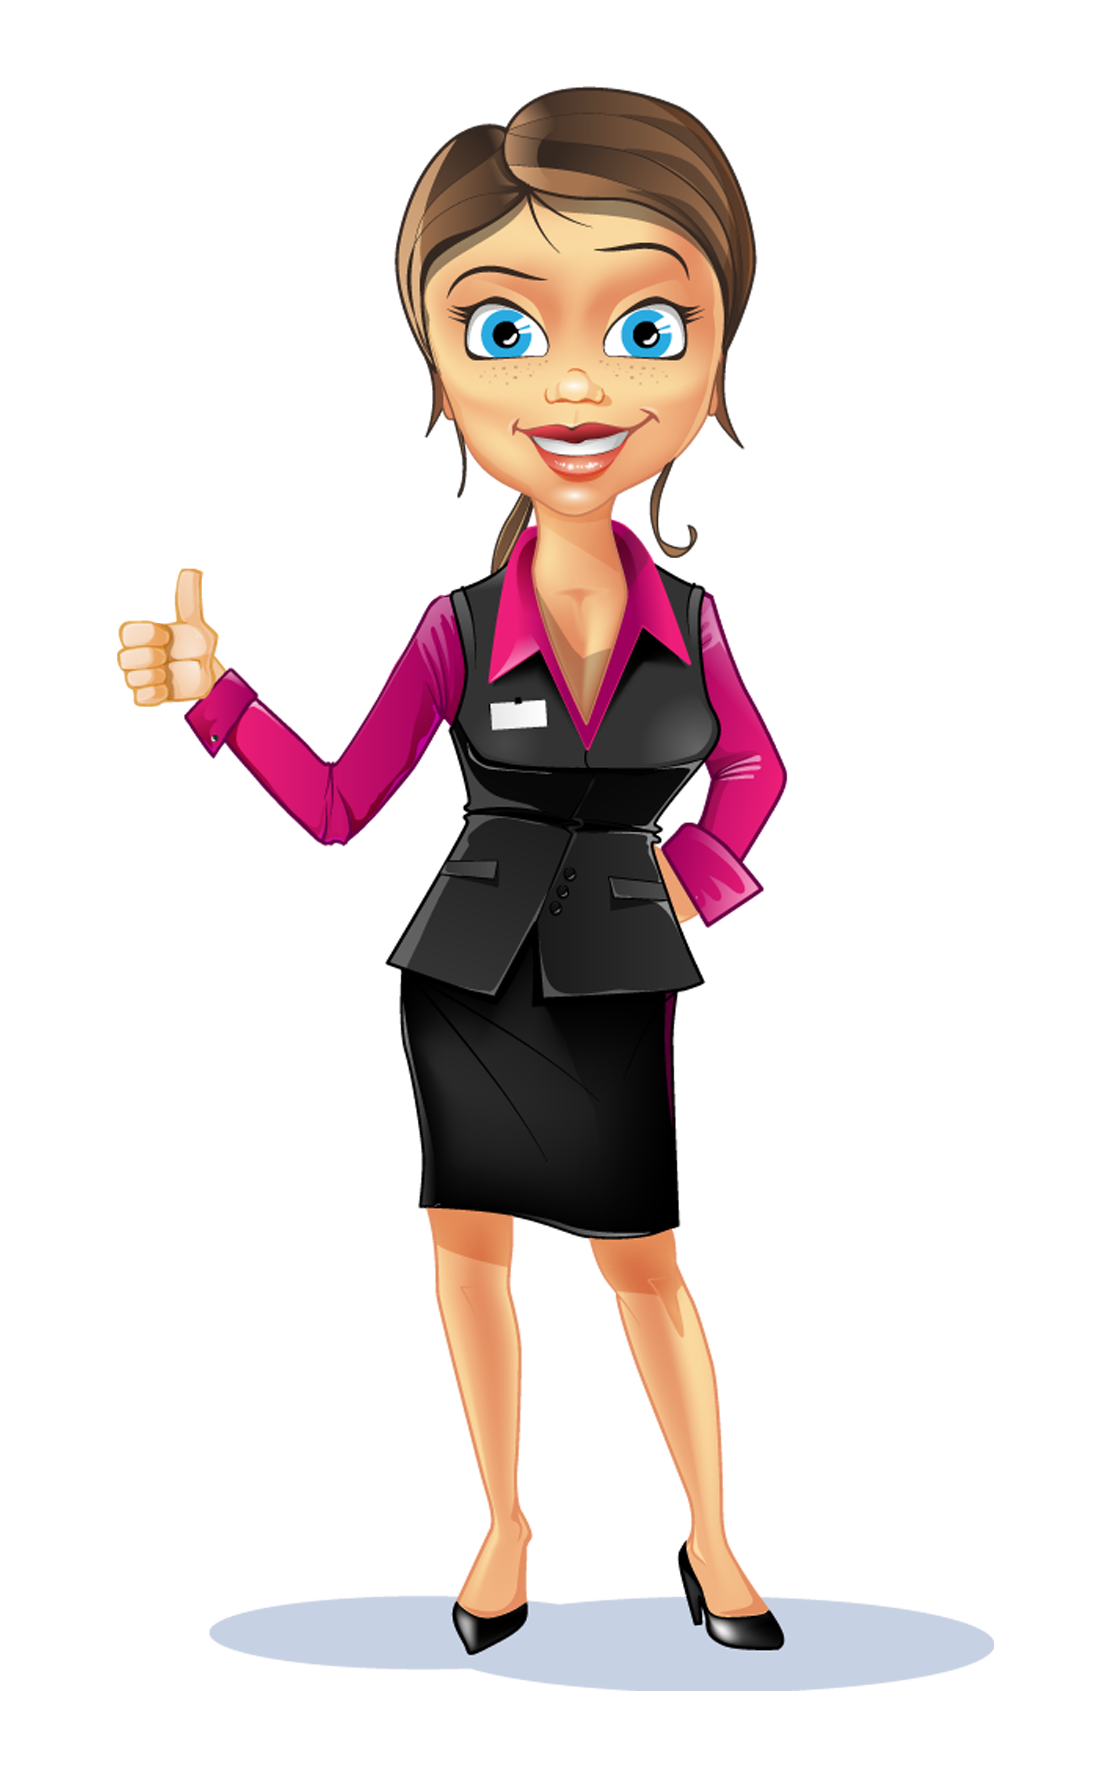 Making Thumbs Up Business Women Cartoon Character - Photo #497 -   | Free PNG Images Download